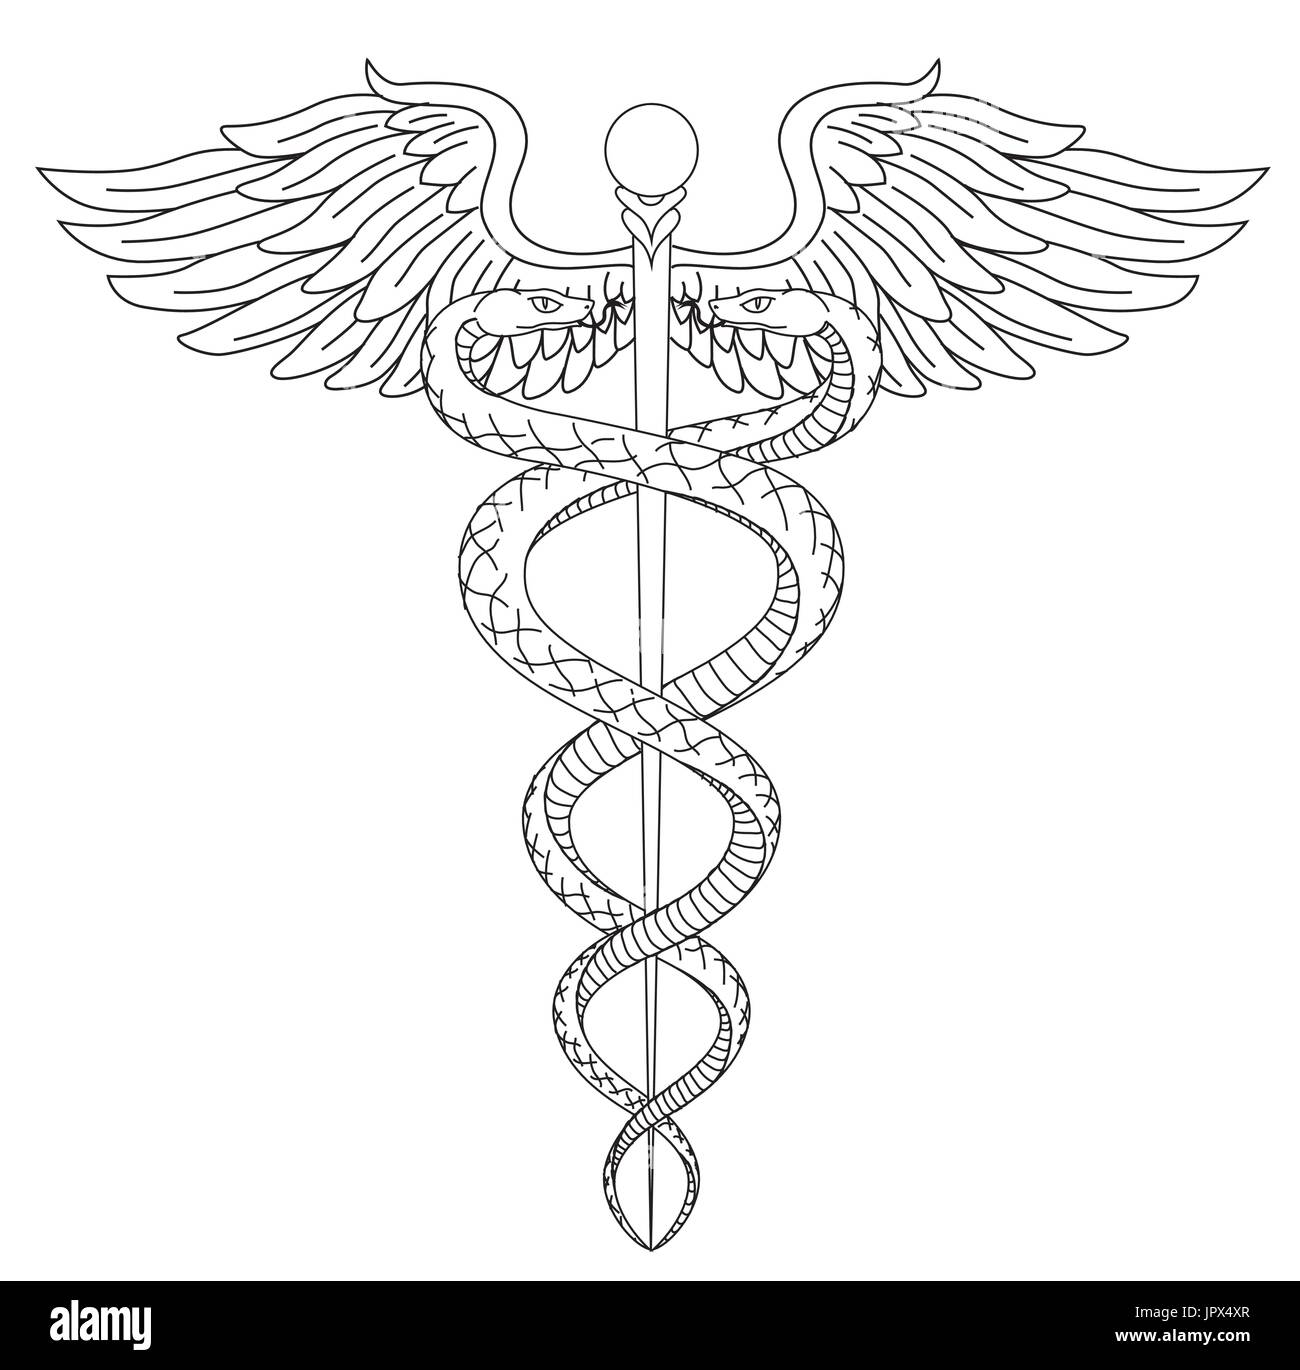 Cadeus Medical medecine pharmacy doctor acient symbol of the science. Vector hand drawn black linear tho snakes with wings sword background. Greek vin Stock Vector